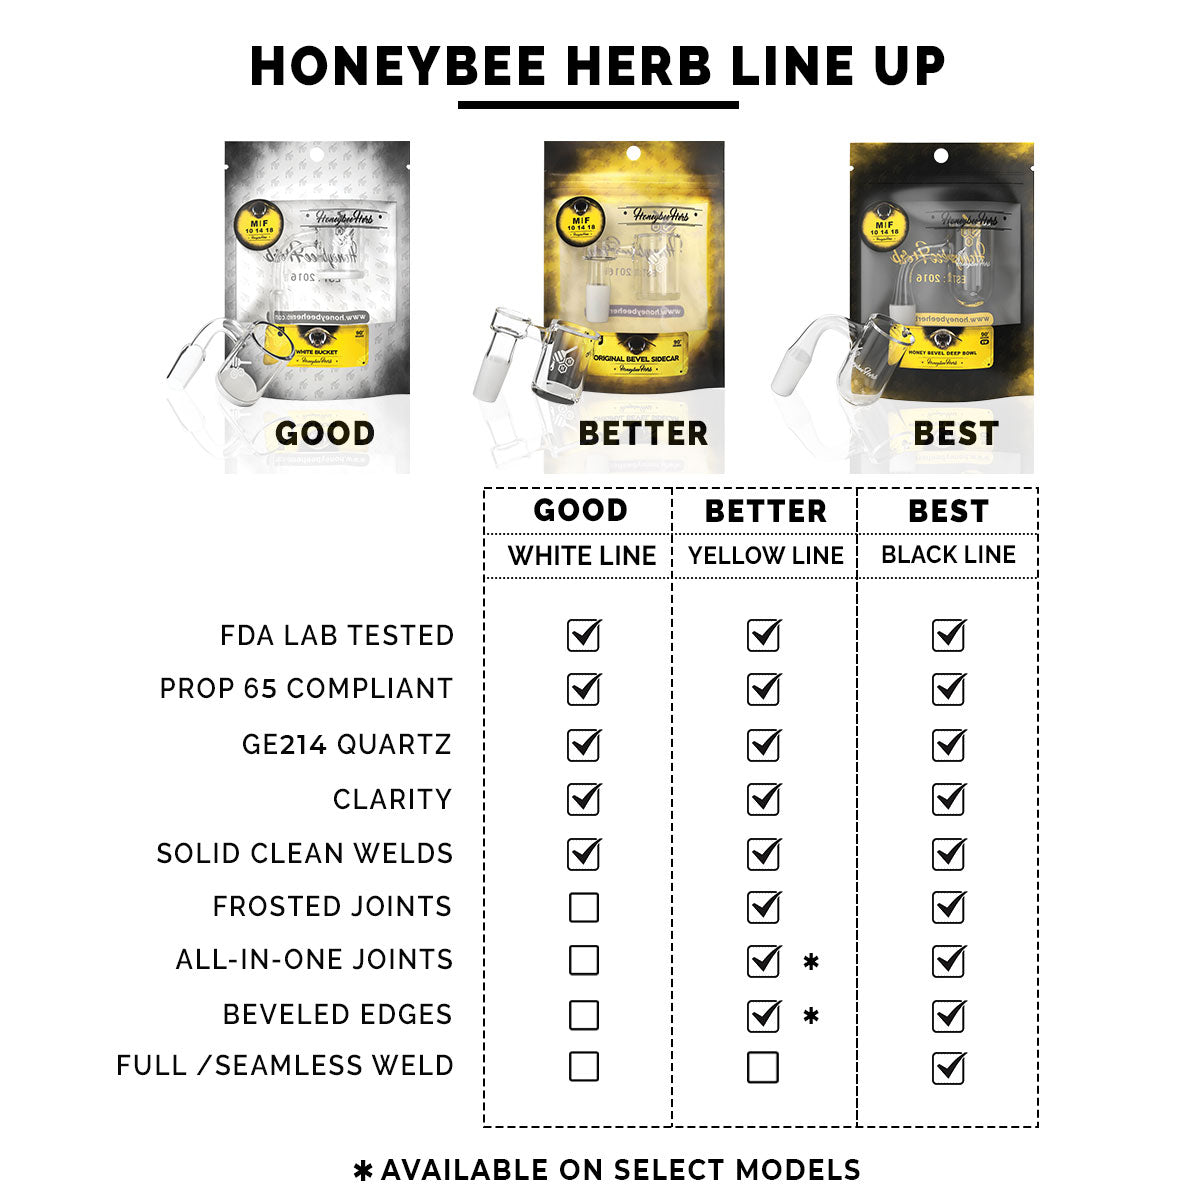 Honeybee Herb banger lineup chart showing quality tiers from good to best with features listed